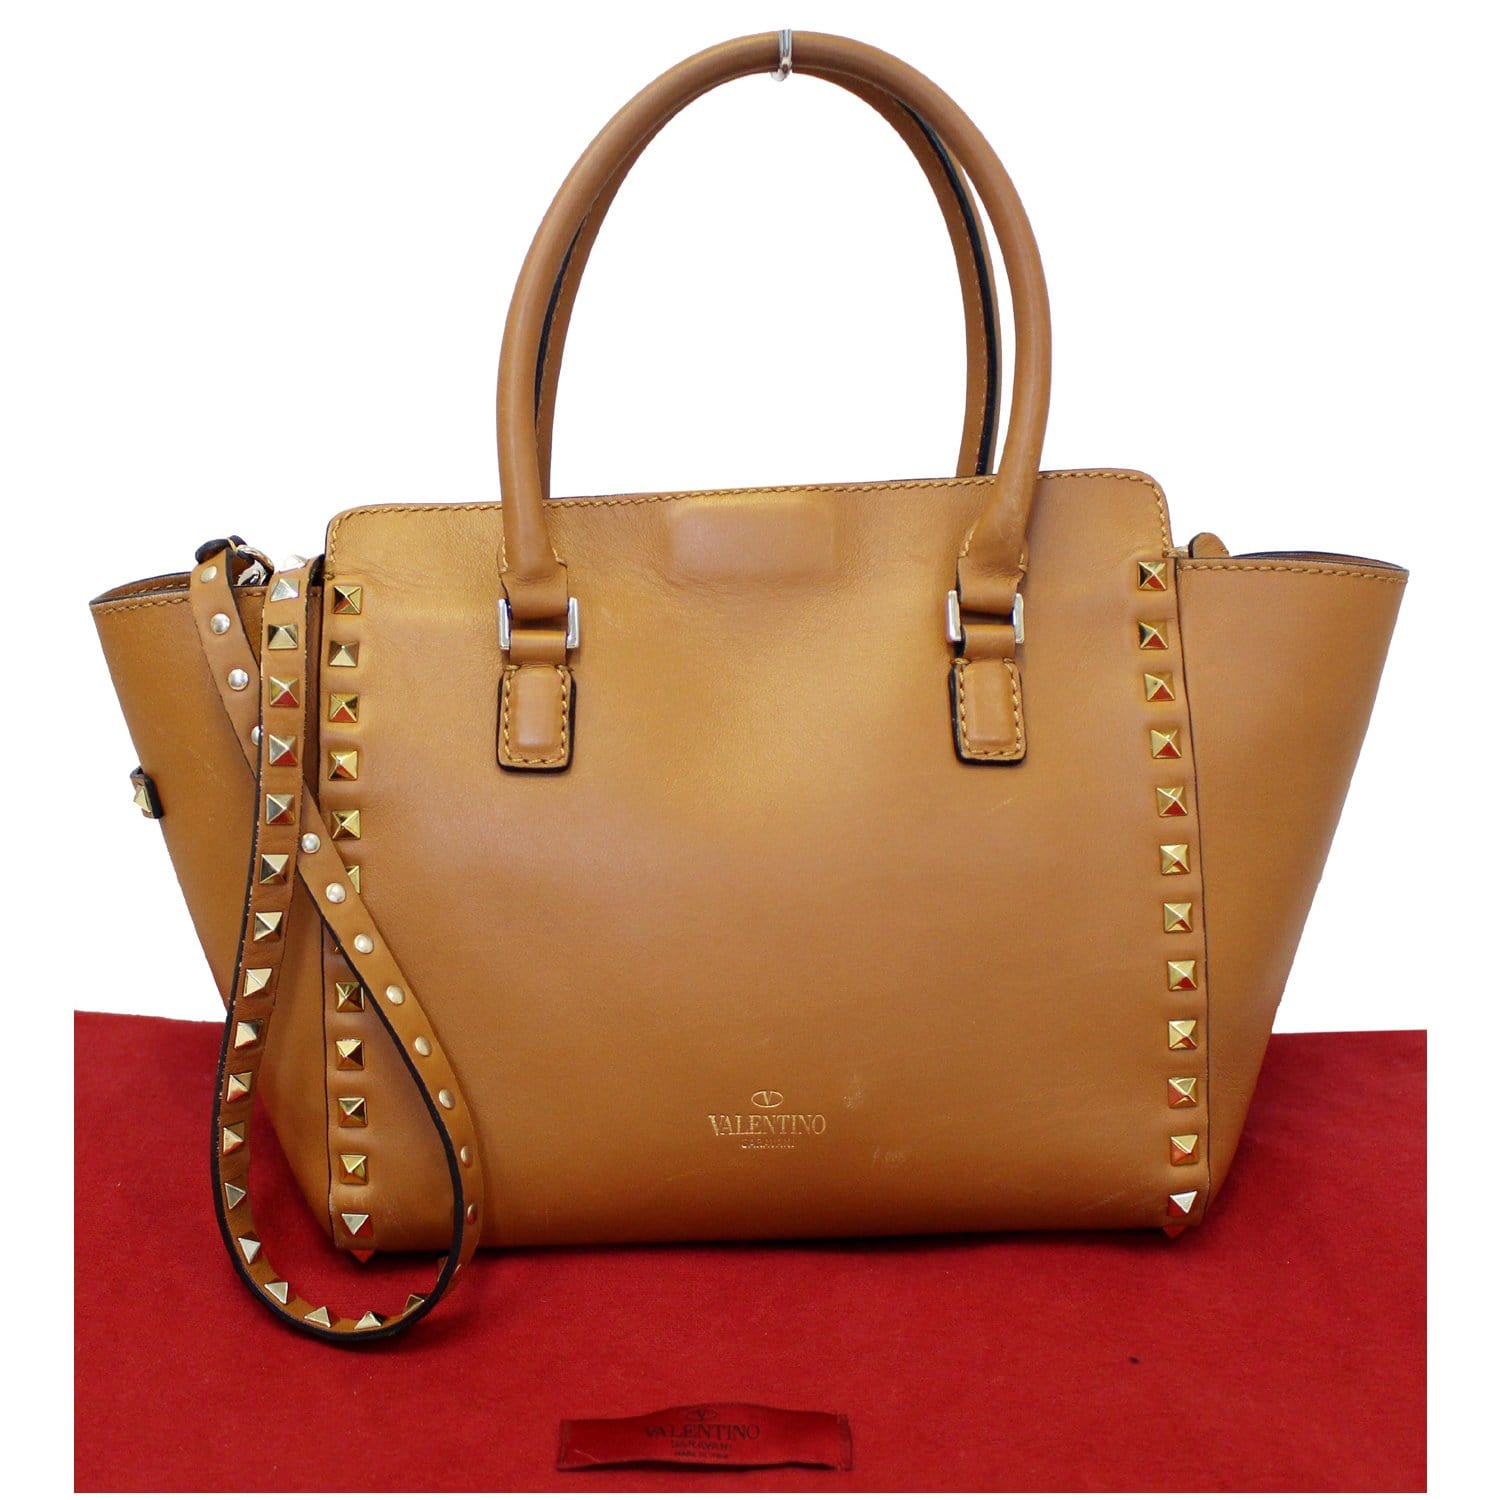 VALENTINO Rockstud Small Double Handle Leather Tote Bag Camel Brown-US